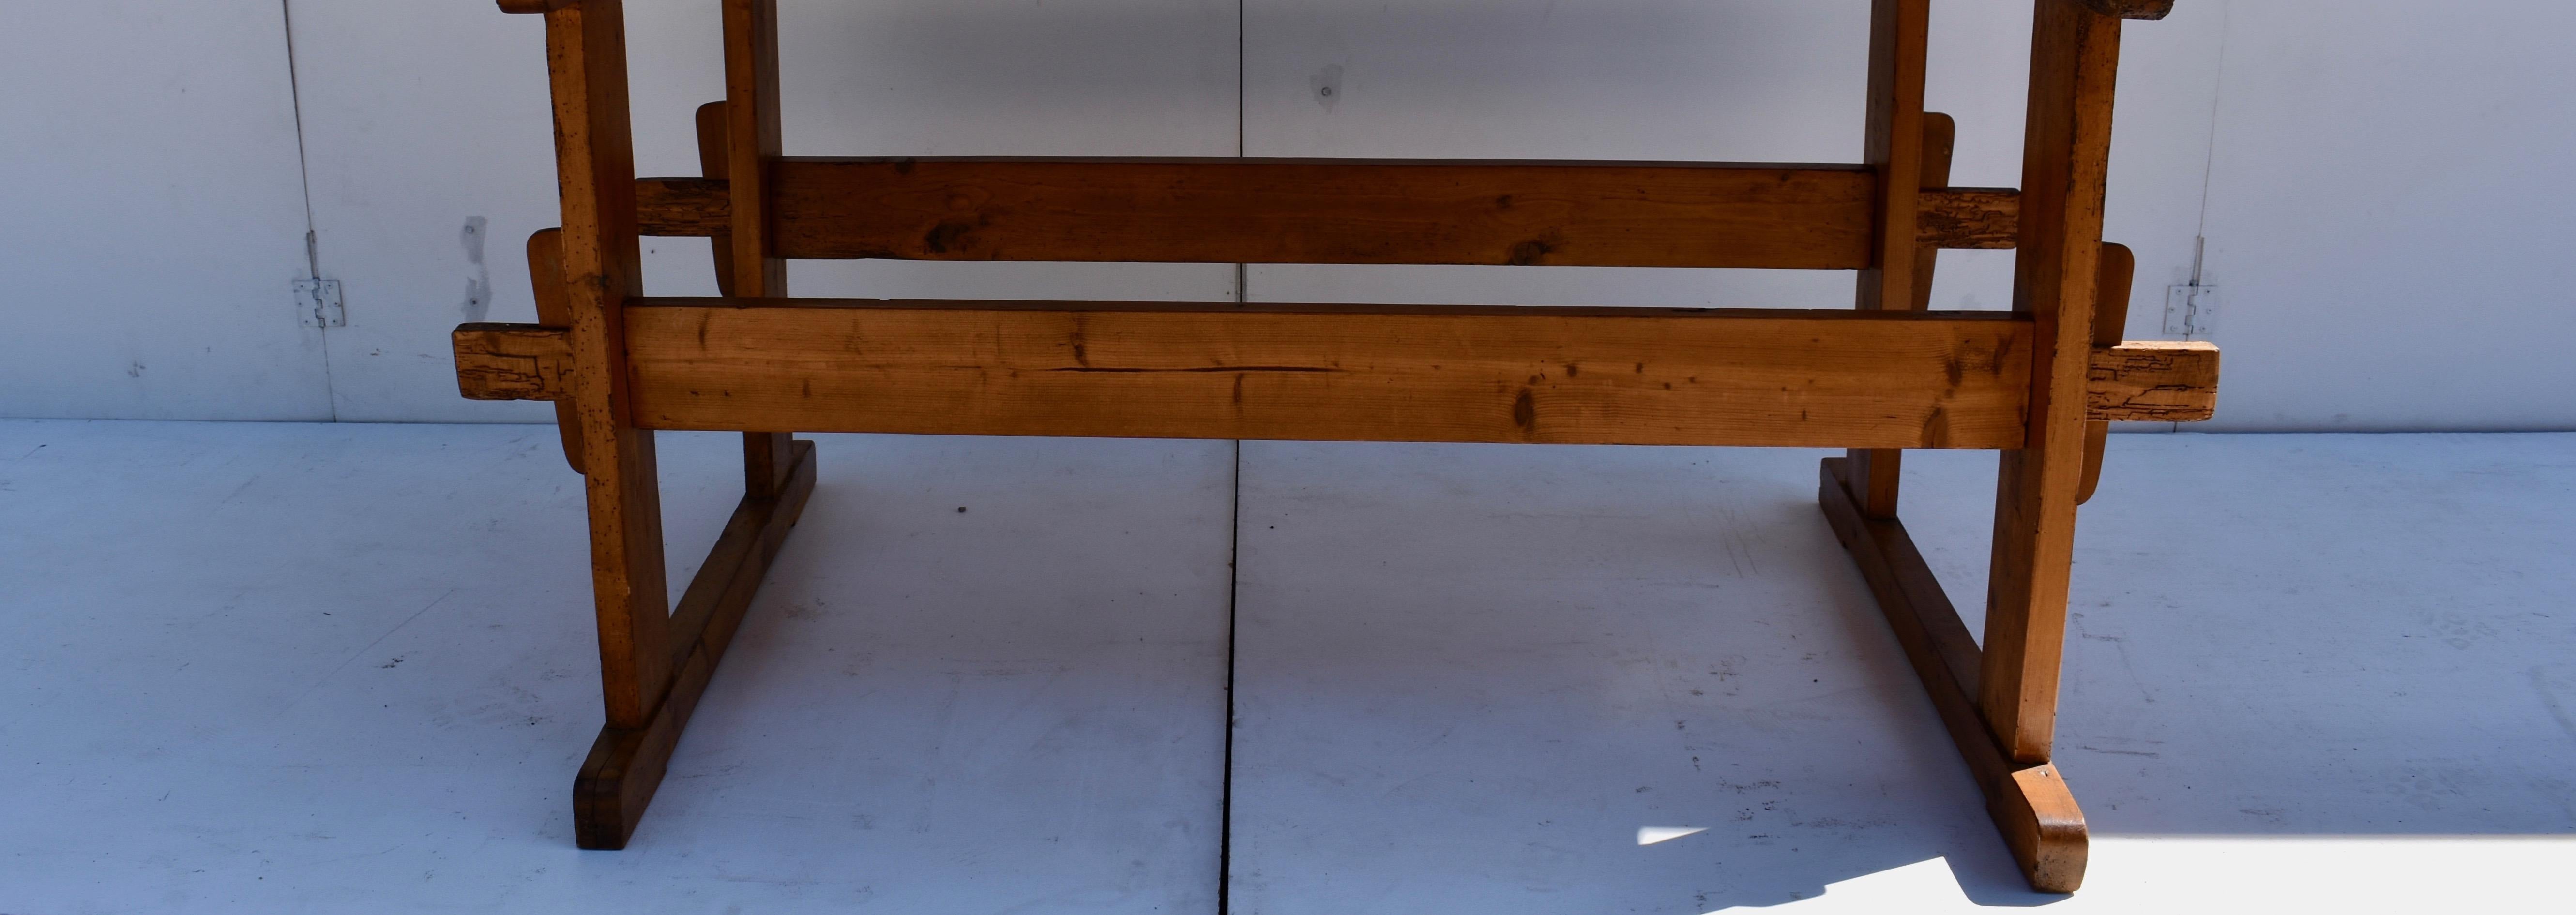 This handsome work table has a beautiful top over one inch thick, nicely chopped and sliced along both sides. The trestle ends have two uprights, a long top member with overhang and a long sled-type foot. The ends are joined with double stretchers